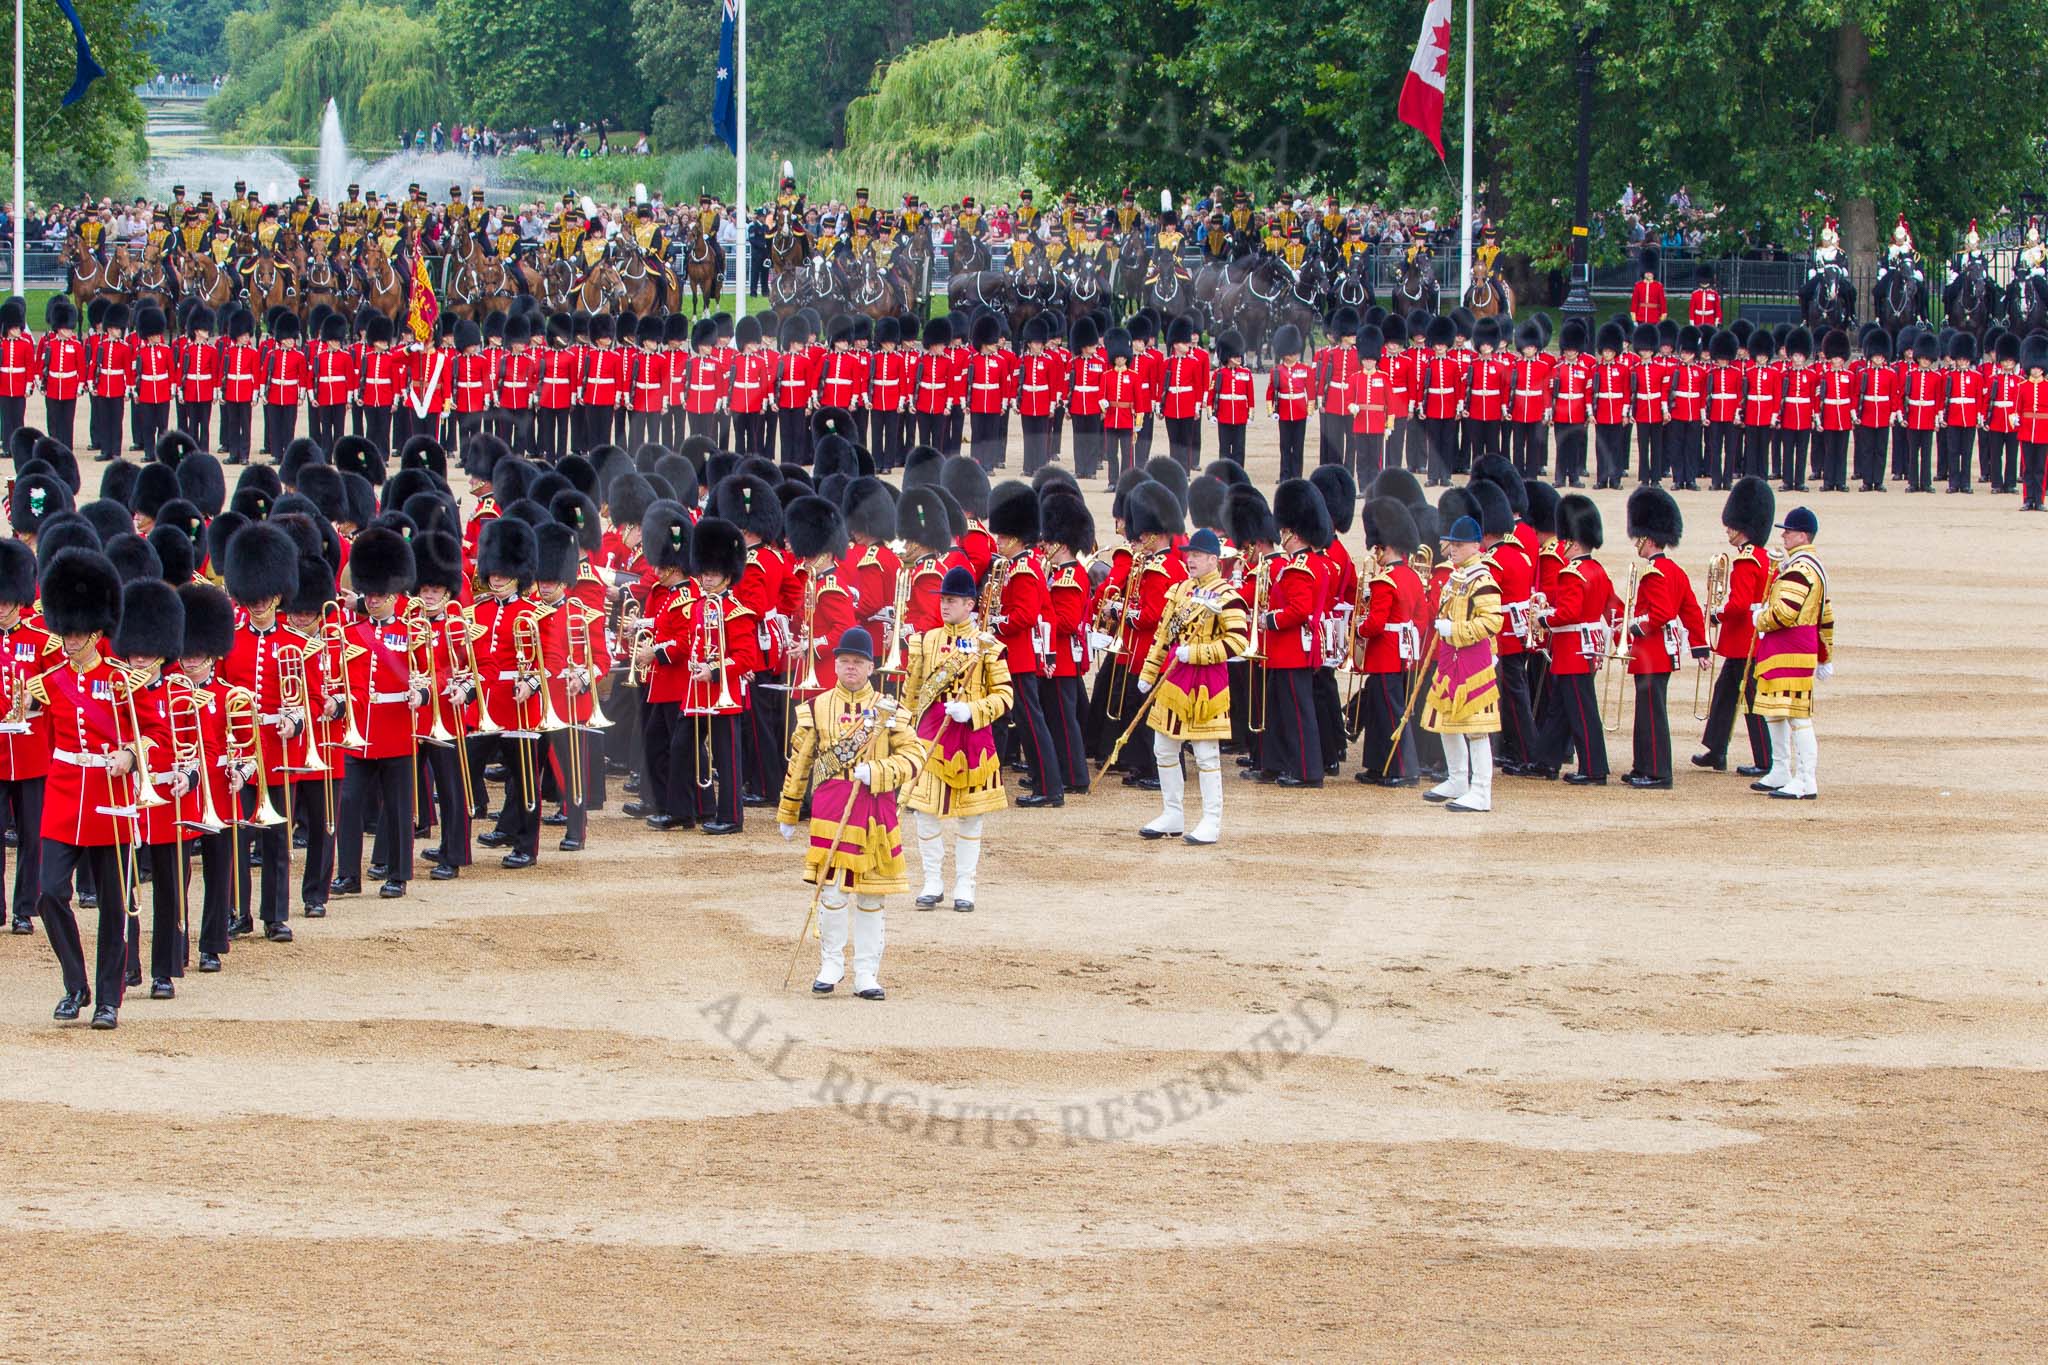 Trooping the Colour 2014.
Horse Guards Parade, Westminster,
London SW1A,

United Kingdom,
on 14 June 2014 at 11:53, image #716